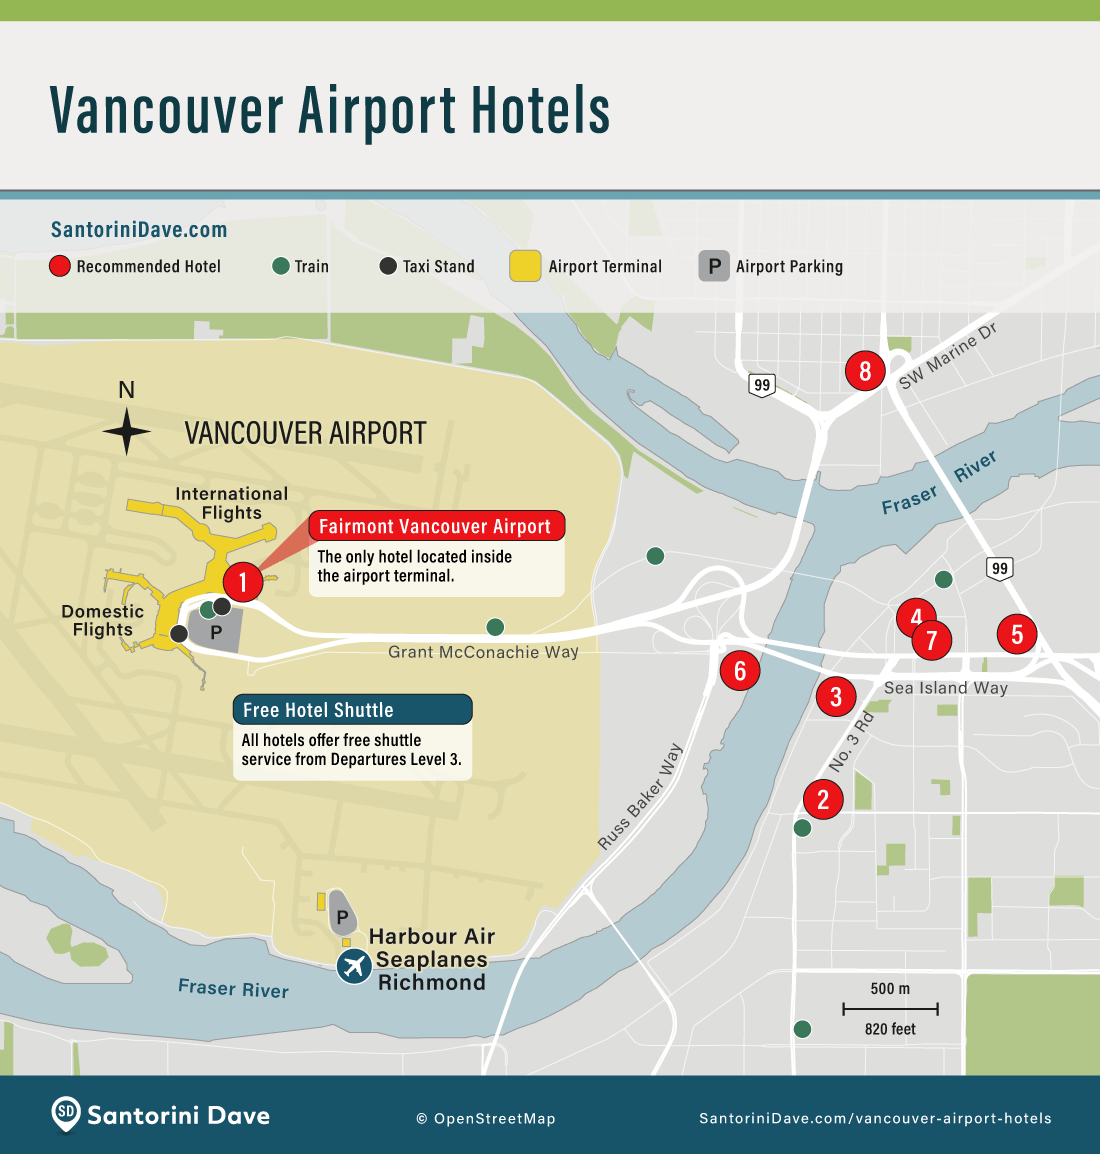 Hotels at Vancouver (YVR) International Airport.